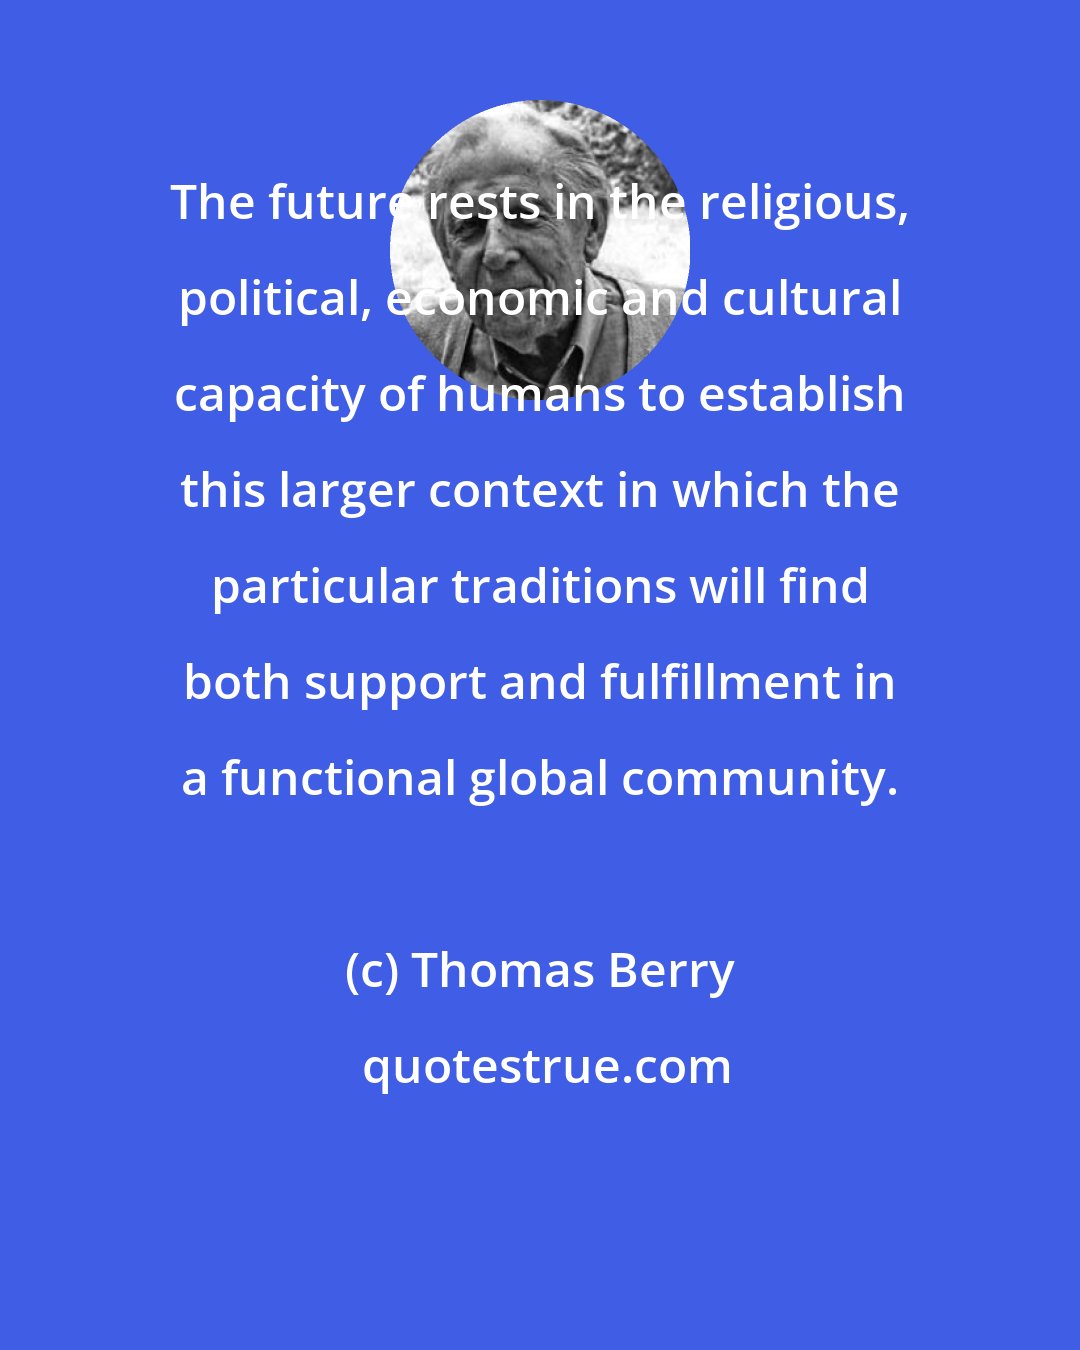 Thomas Berry: The future rests in the religious, political, economic and cultural capacity of humans to establish this larger context in which the particular traditions will find both support and fulfillment in a functional global community.